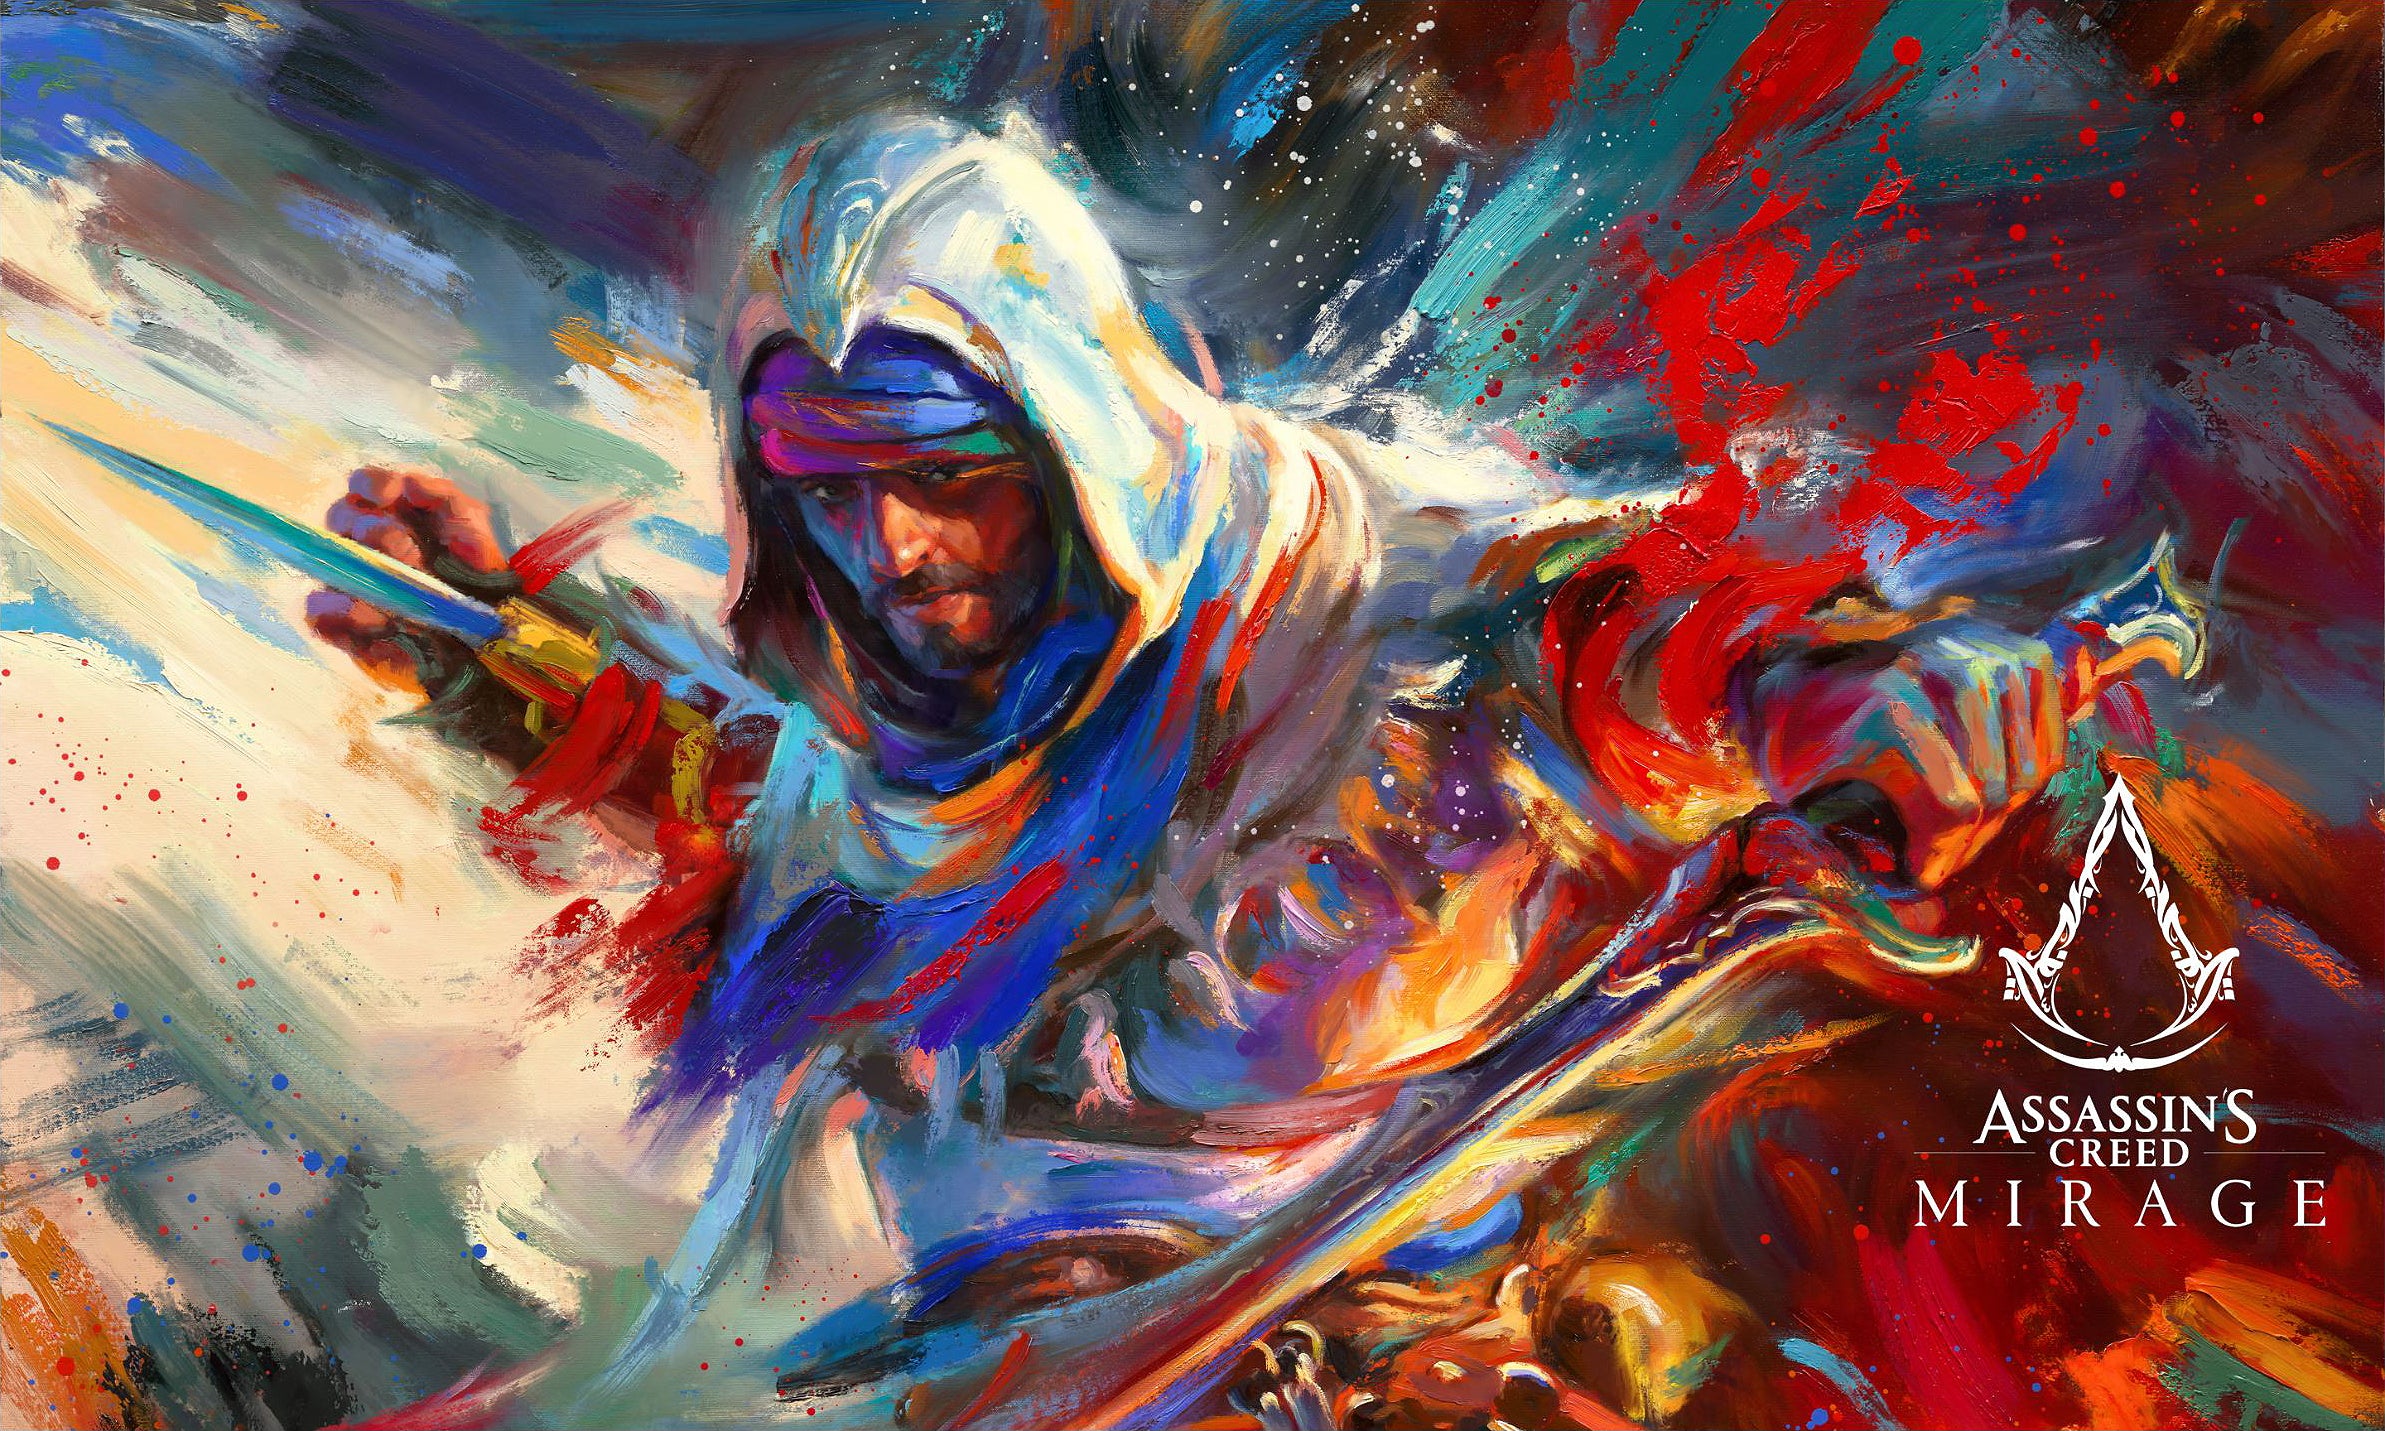 Limited edition artwork on canvas for sale to buy of Assassin's Creed Basim of Mirage bursting forth with energy and painted with colorful brushstrokes in an expressionistic style.